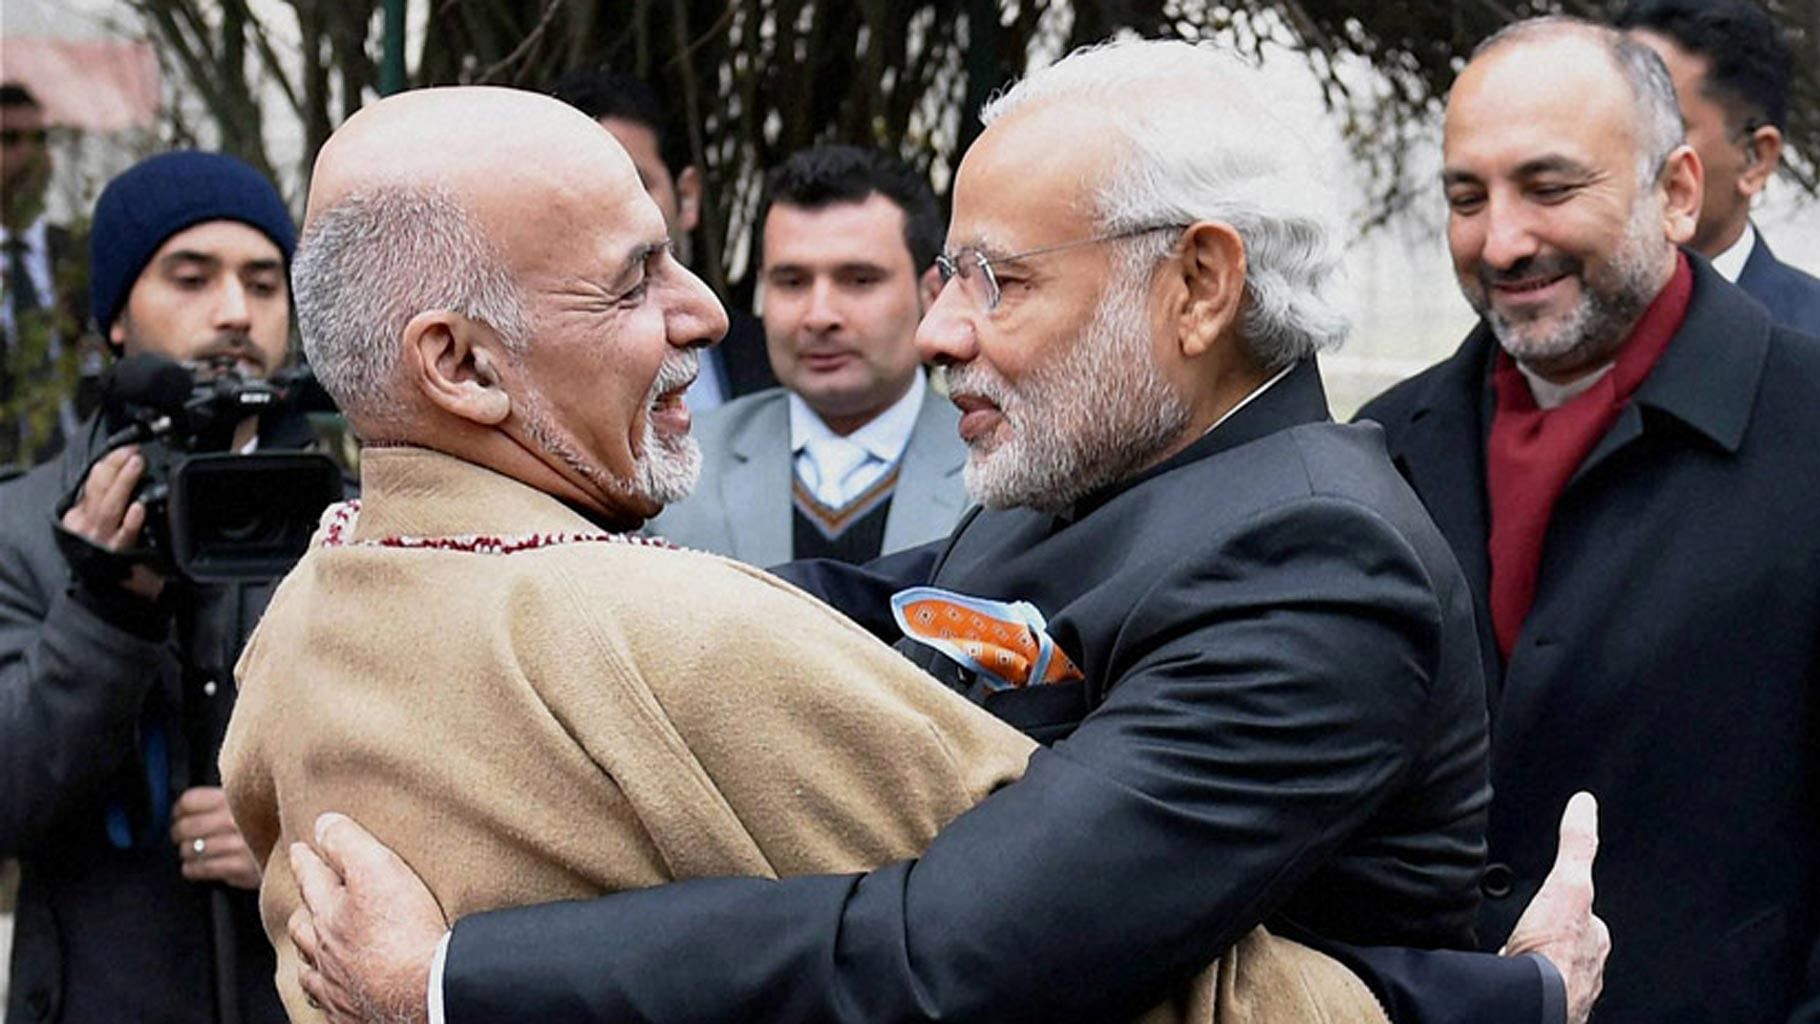 File image. Prime Minister Narendra Modi and Afghan President Ashraf Ghani hug each other during a welcome ceremony at President Palace in Kabul. (Photo: PTI)